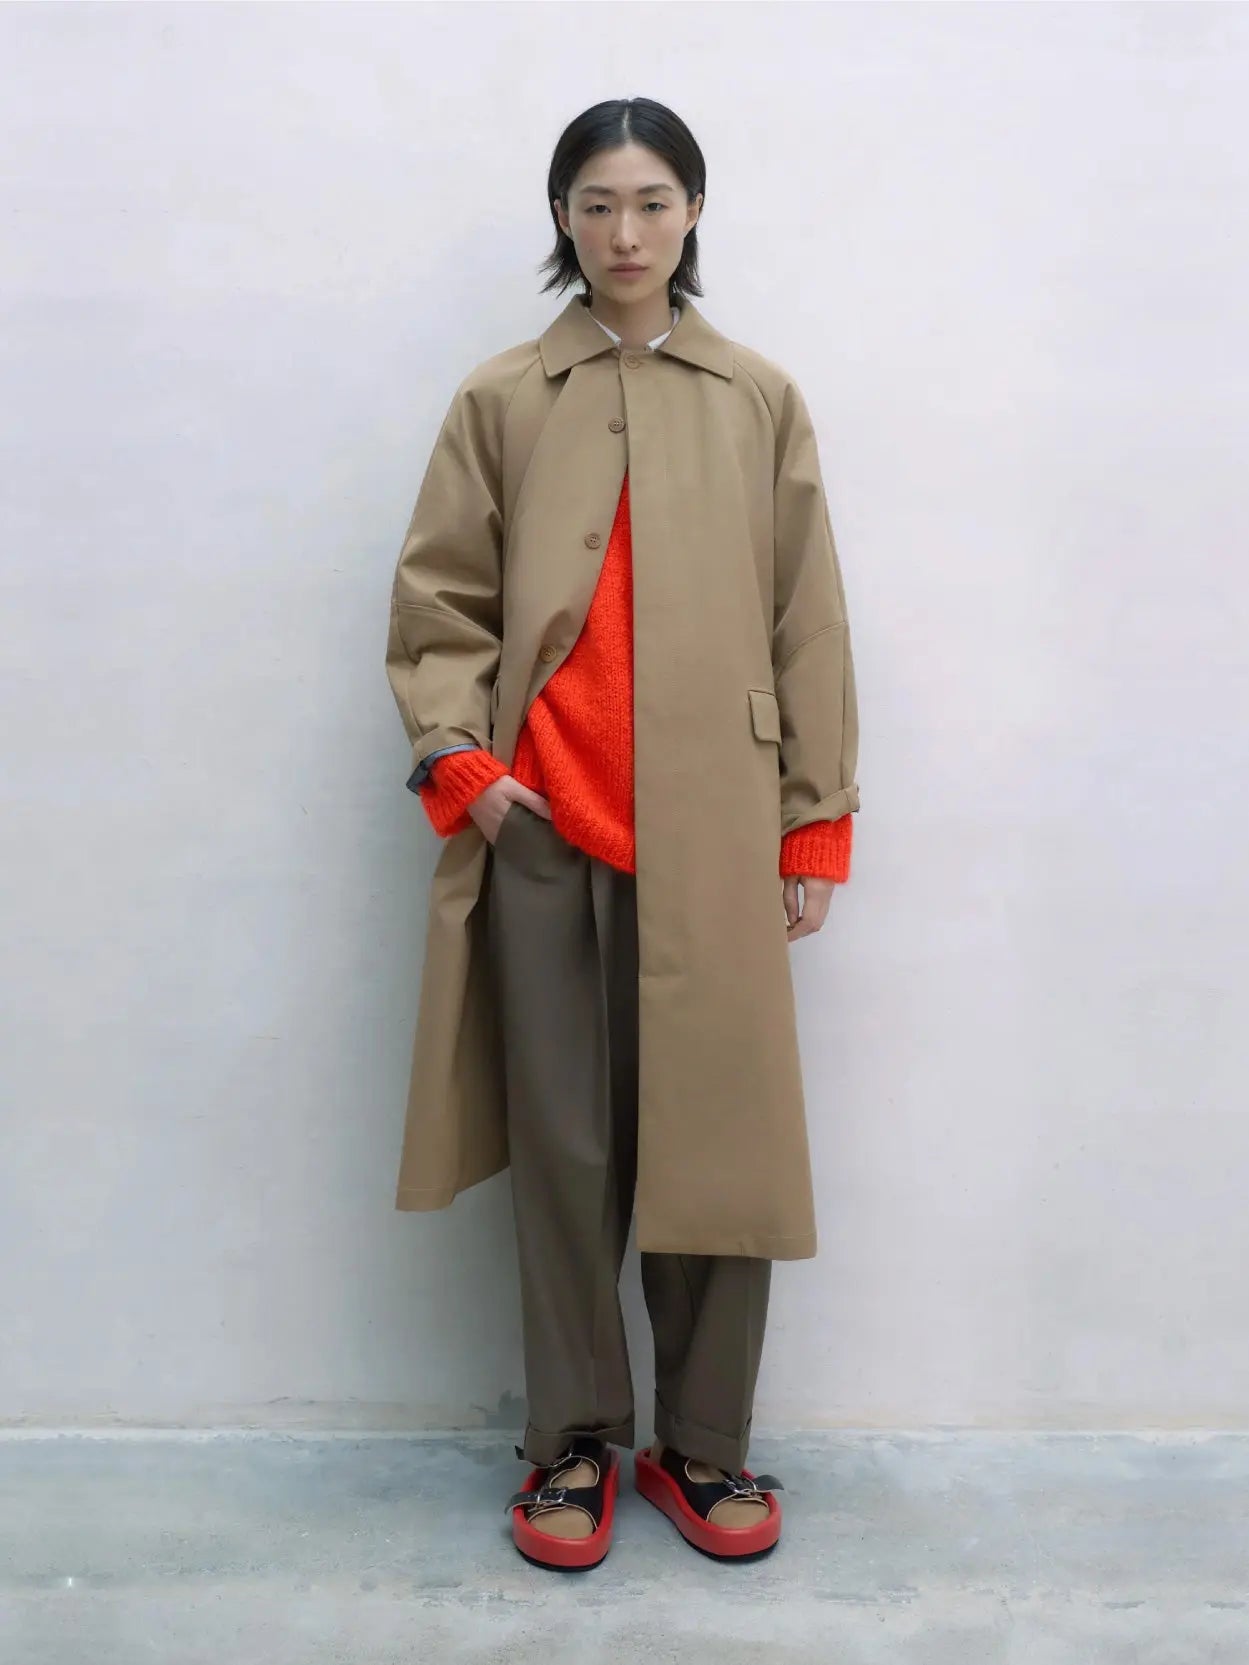 A long beige Trench Coat Camel with a collared neckline, designed for a straight fit. It features long sleeves, two front flap pockets, and a concealed front button closure. Available at Bassalstore in Barcelona, the label tag at the neckline reads "Cordera.